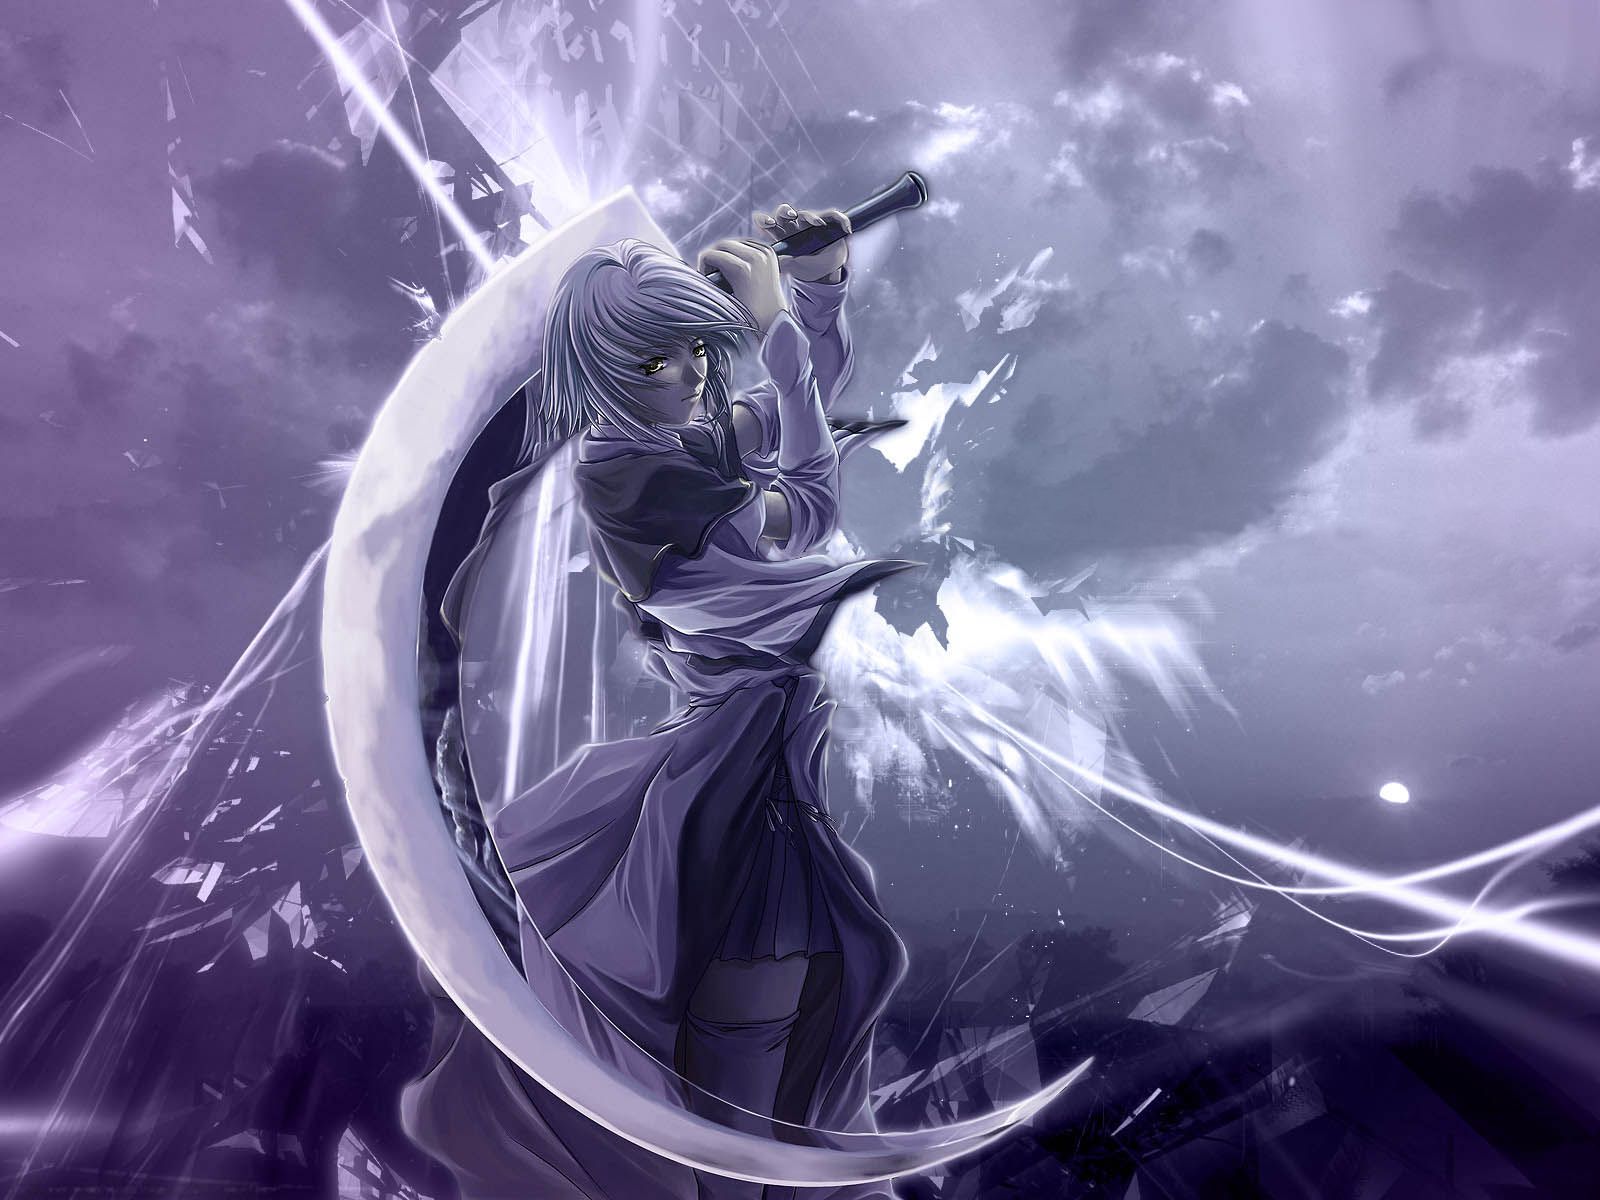 Other anime hd wallpapers anime girls swords